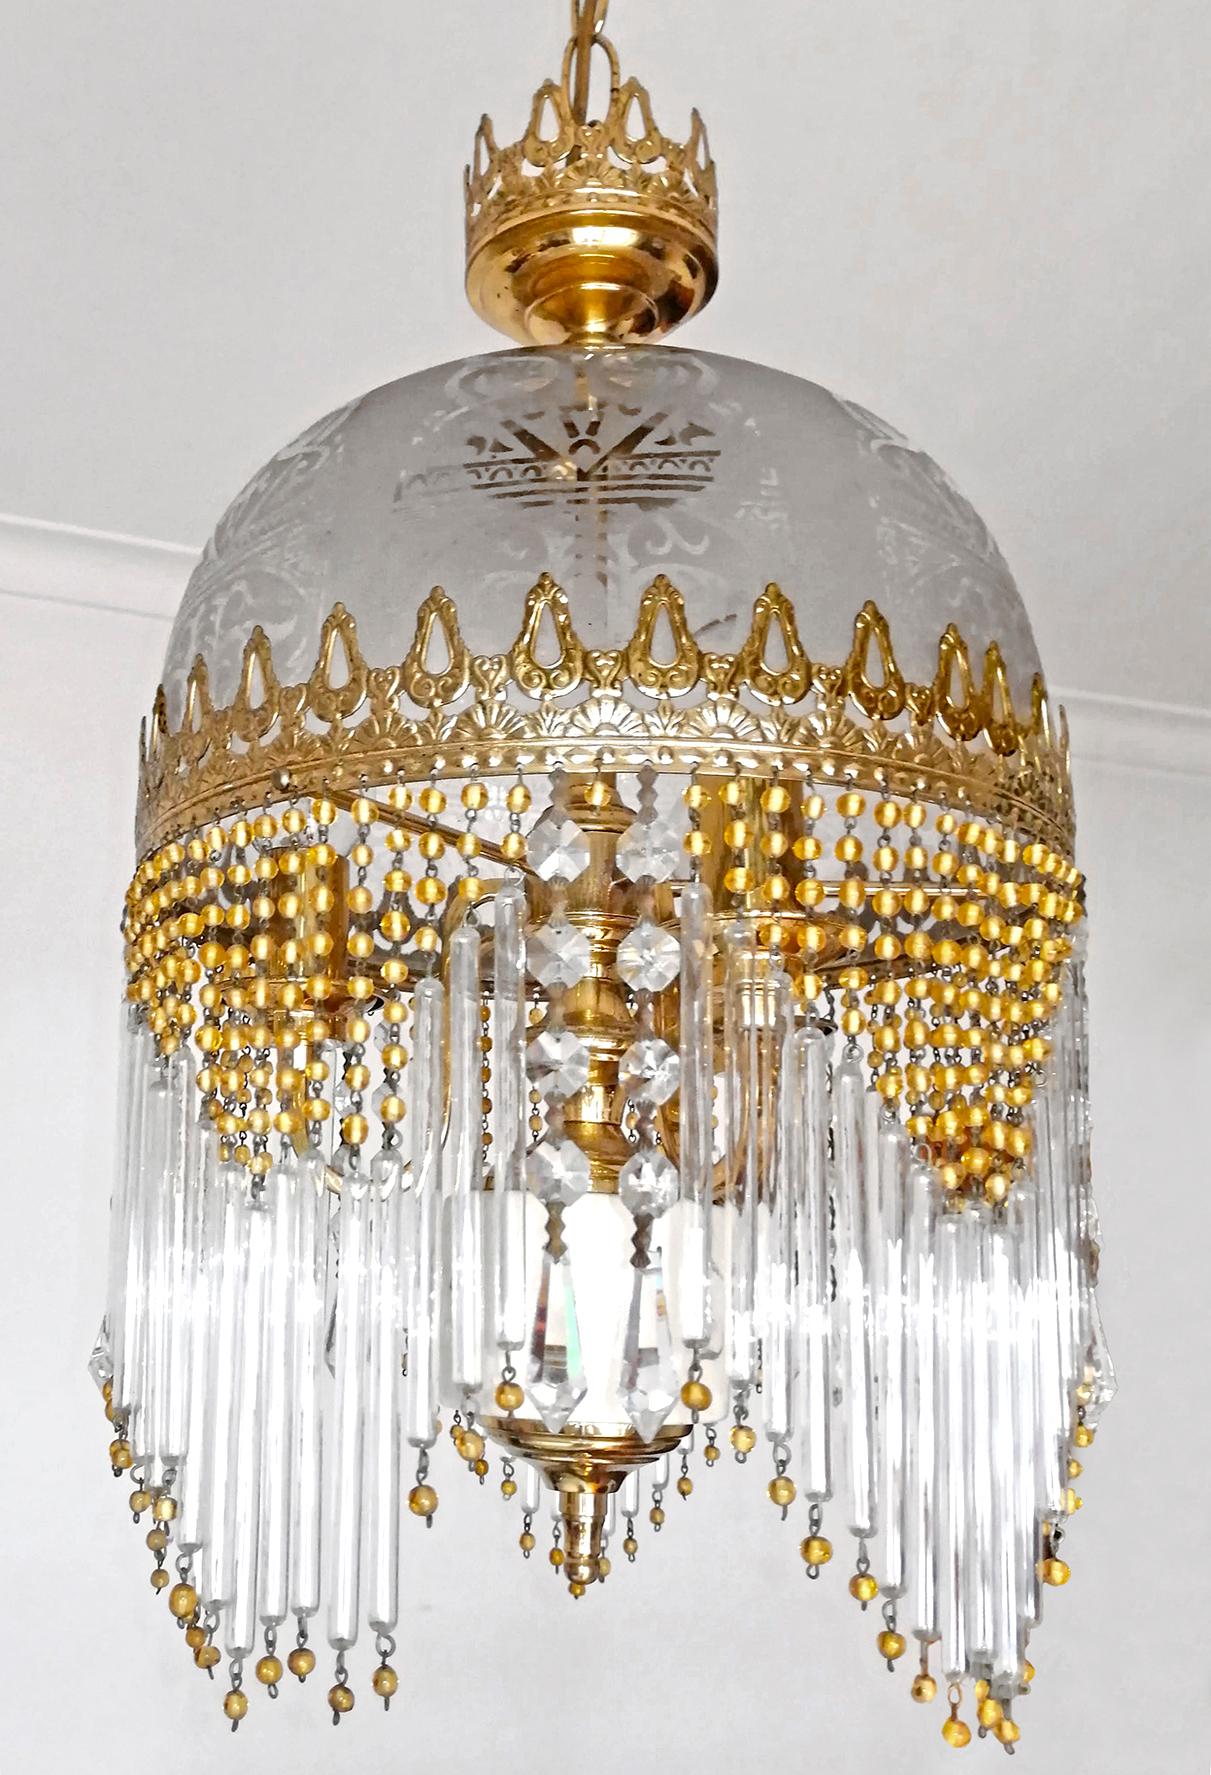 Beautiful Italian midcentury in clear and Murano beaded glass Art Deco / Art Nouveau chandelier.
Measures:
Diameter 11 in/28 cm
Height 35.5 in (chain/11 in)/ 90 cm (chain/28 cm)
3-light bulbs E14/ good working condition.
Age patina.
Assembly